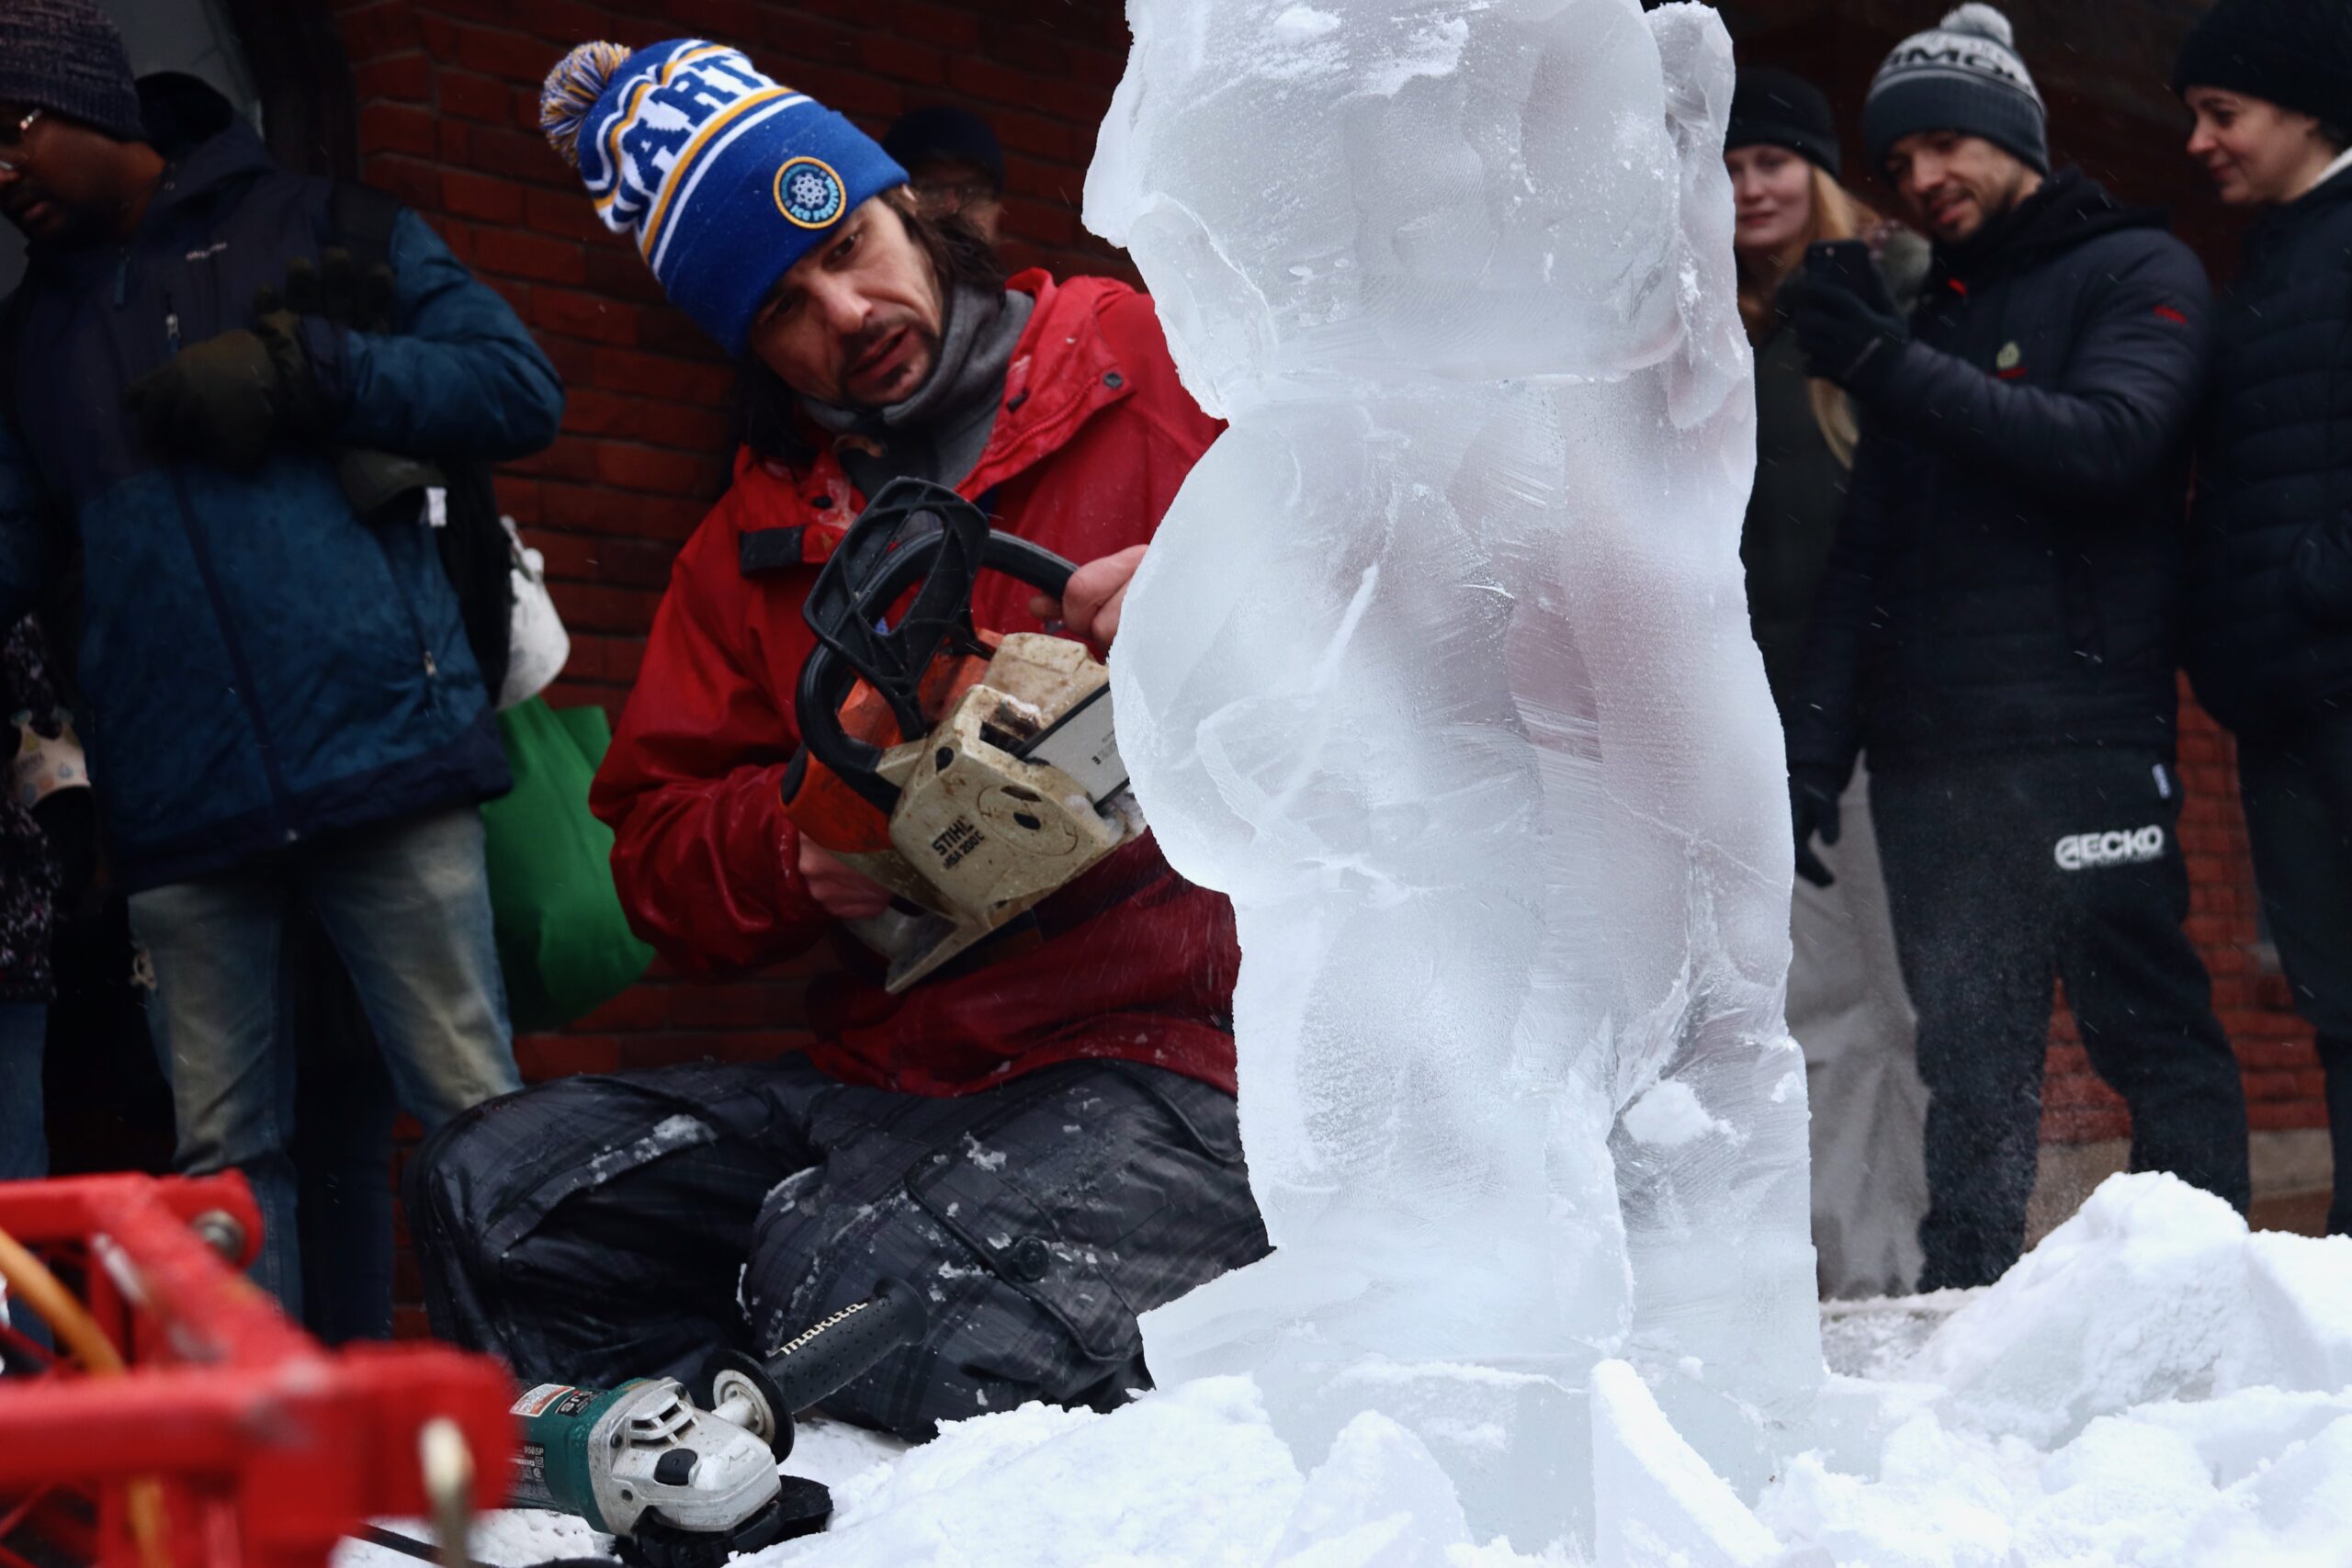 Kneeling man uses chainsaw to carve an ice sculpture.